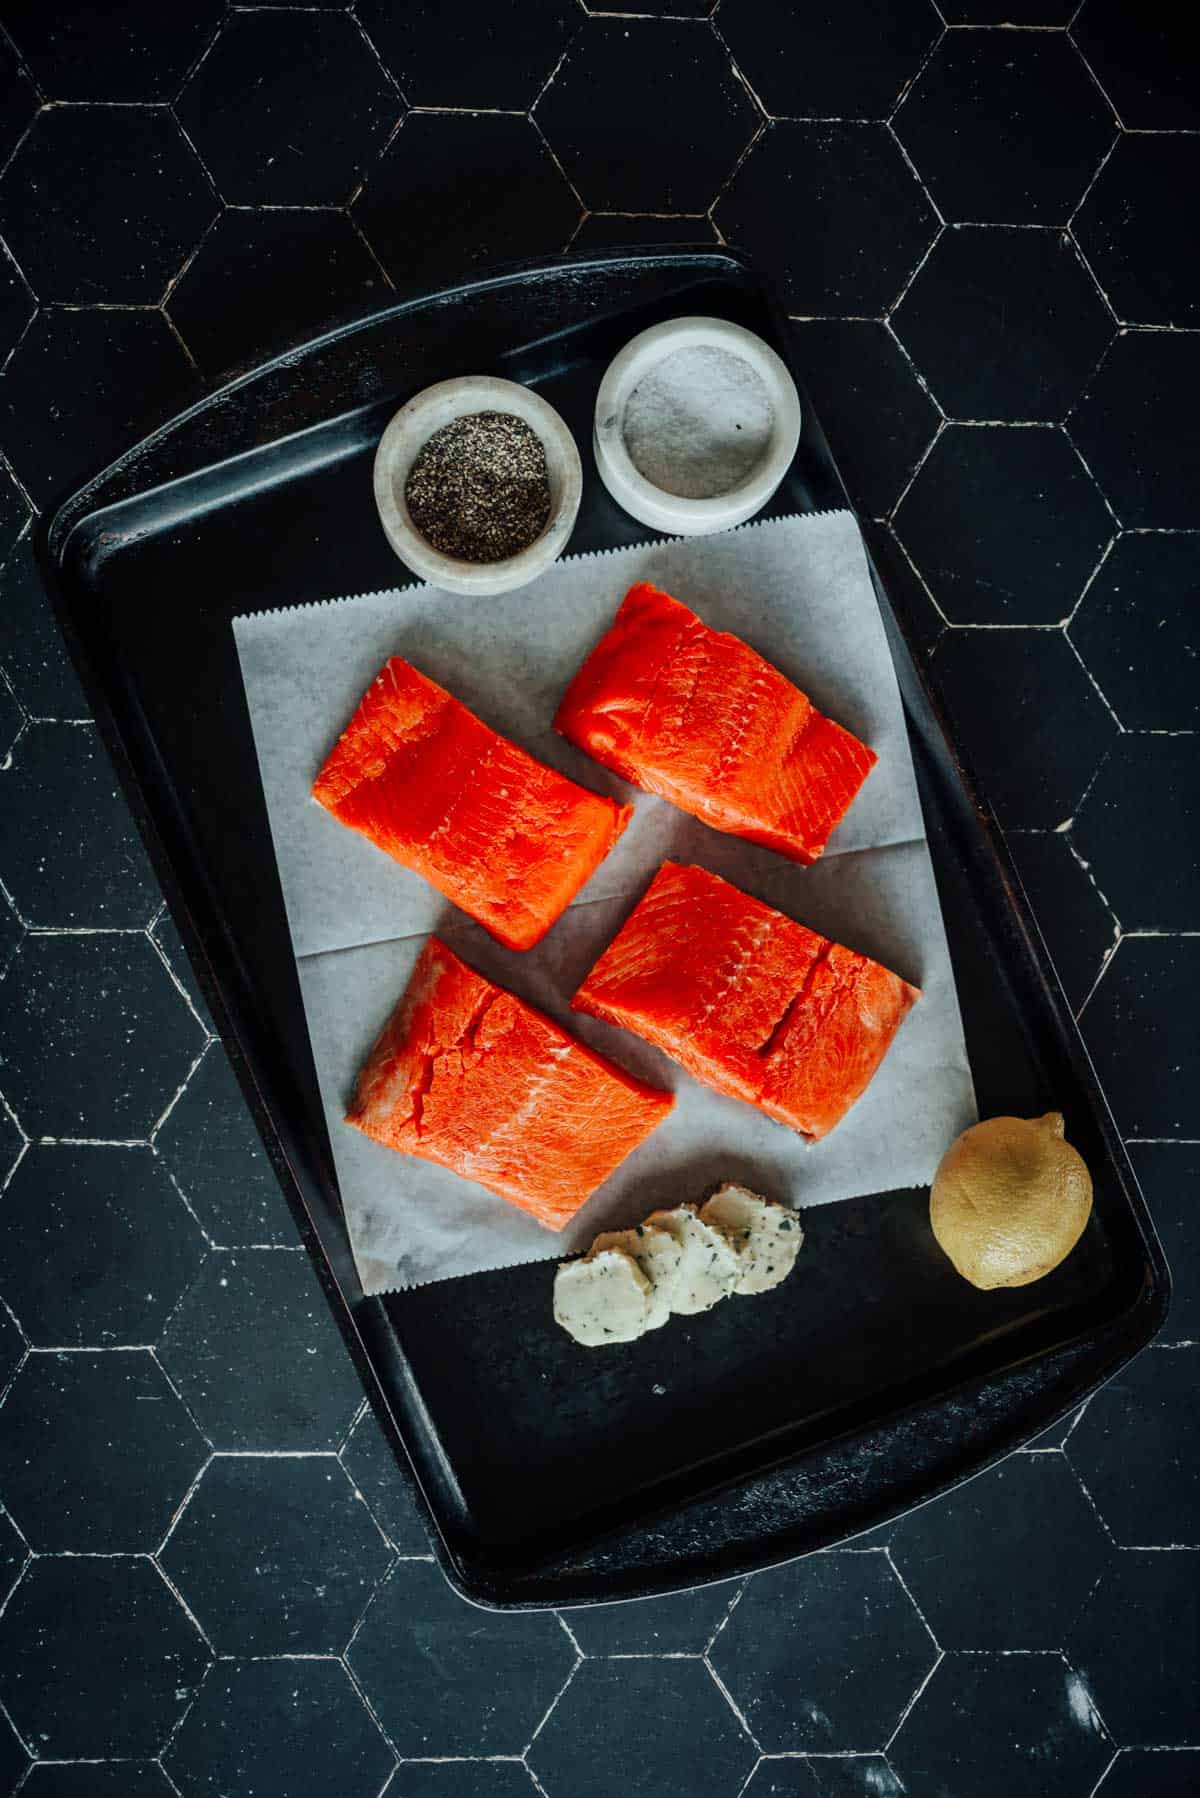 Four raw salmon fillets on parchment paper in a baking tray, surrounded by bowls of salt and pepper, a lemon, and small dollops of butter on a dark background.